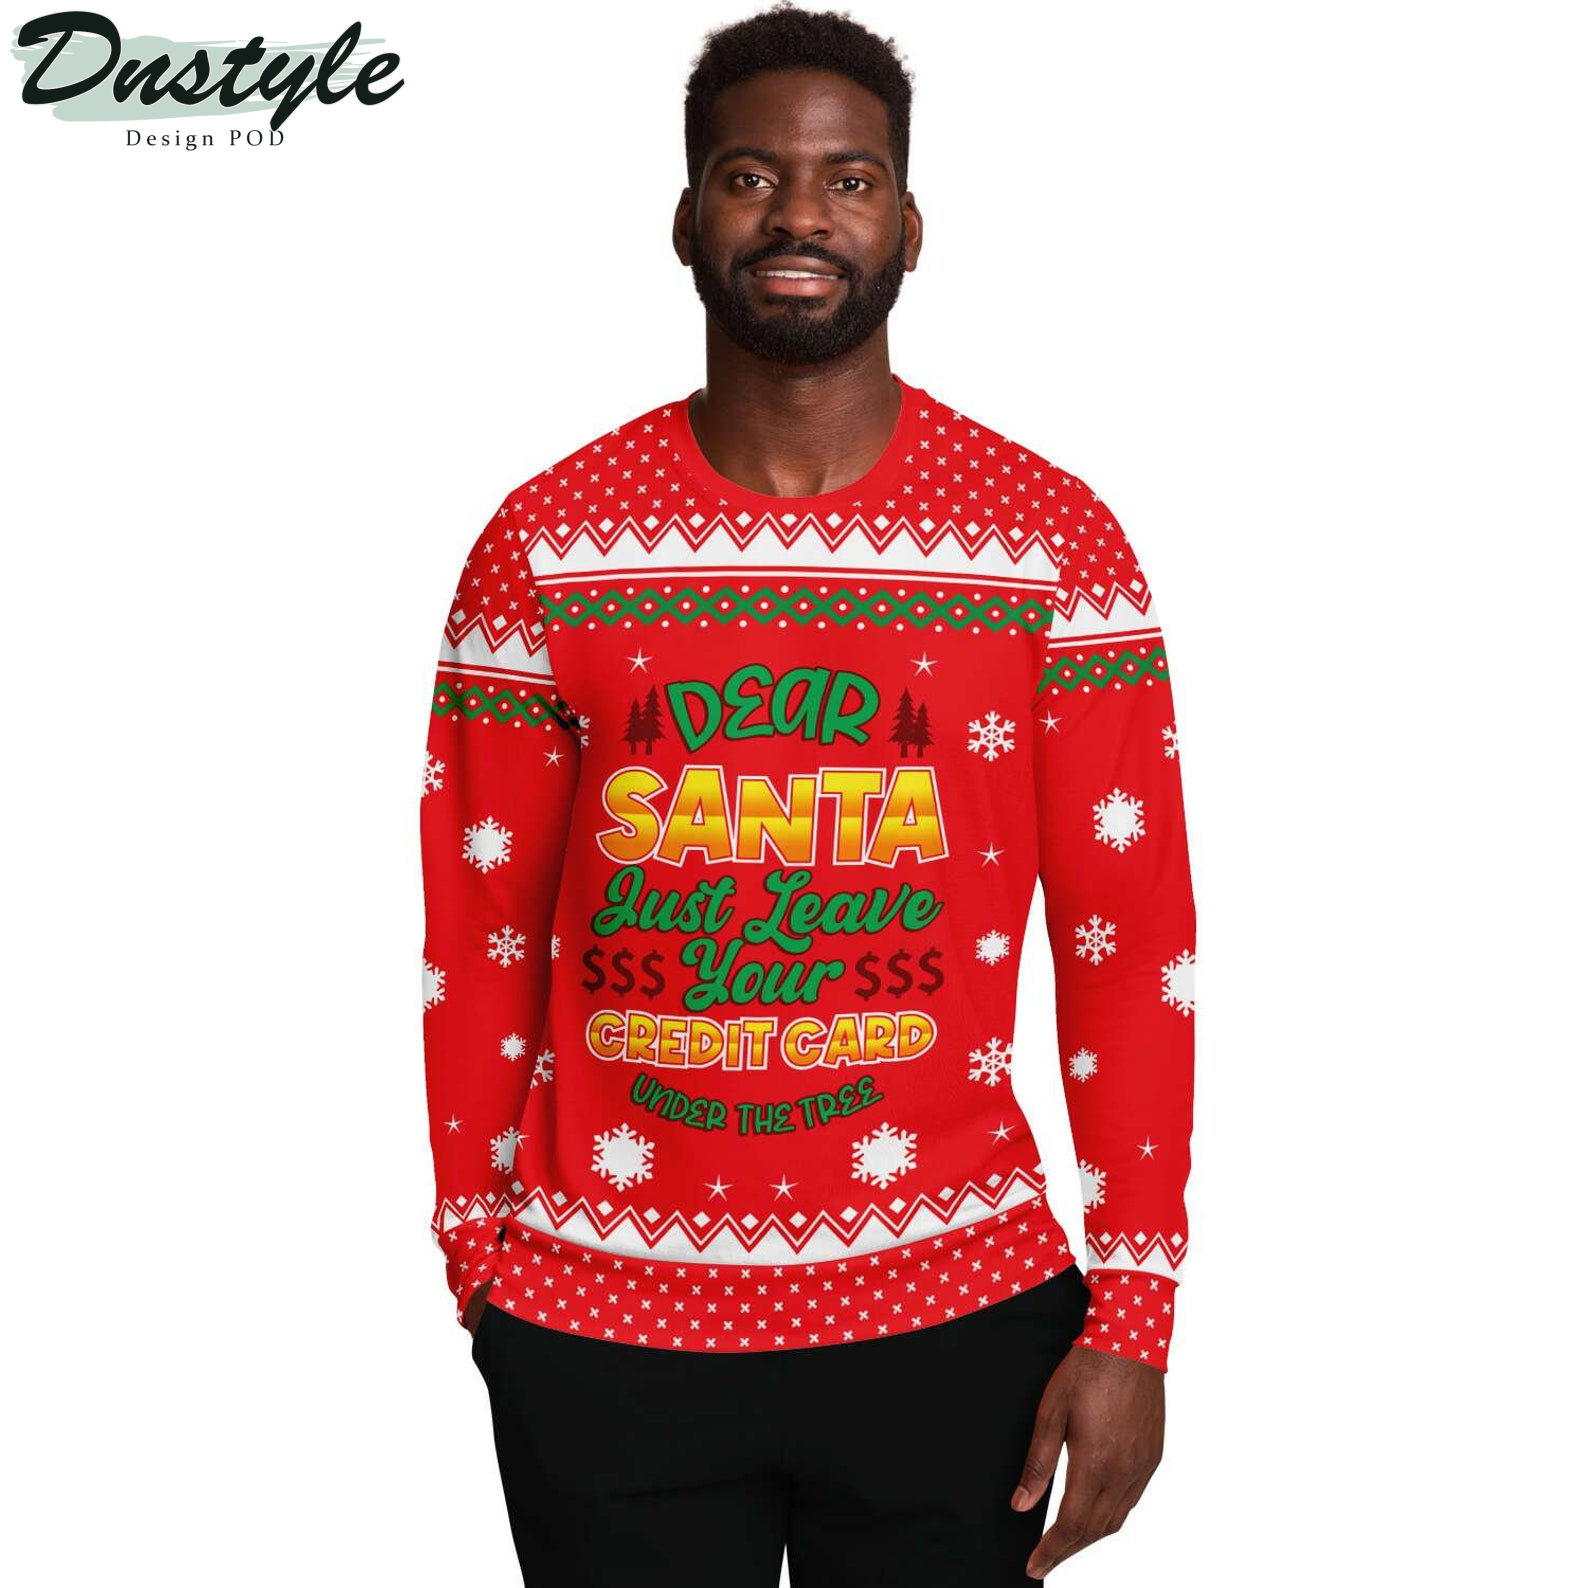 Dear Santa Just Leave Your Credit Card 2022 Ugly Christmas Sweater